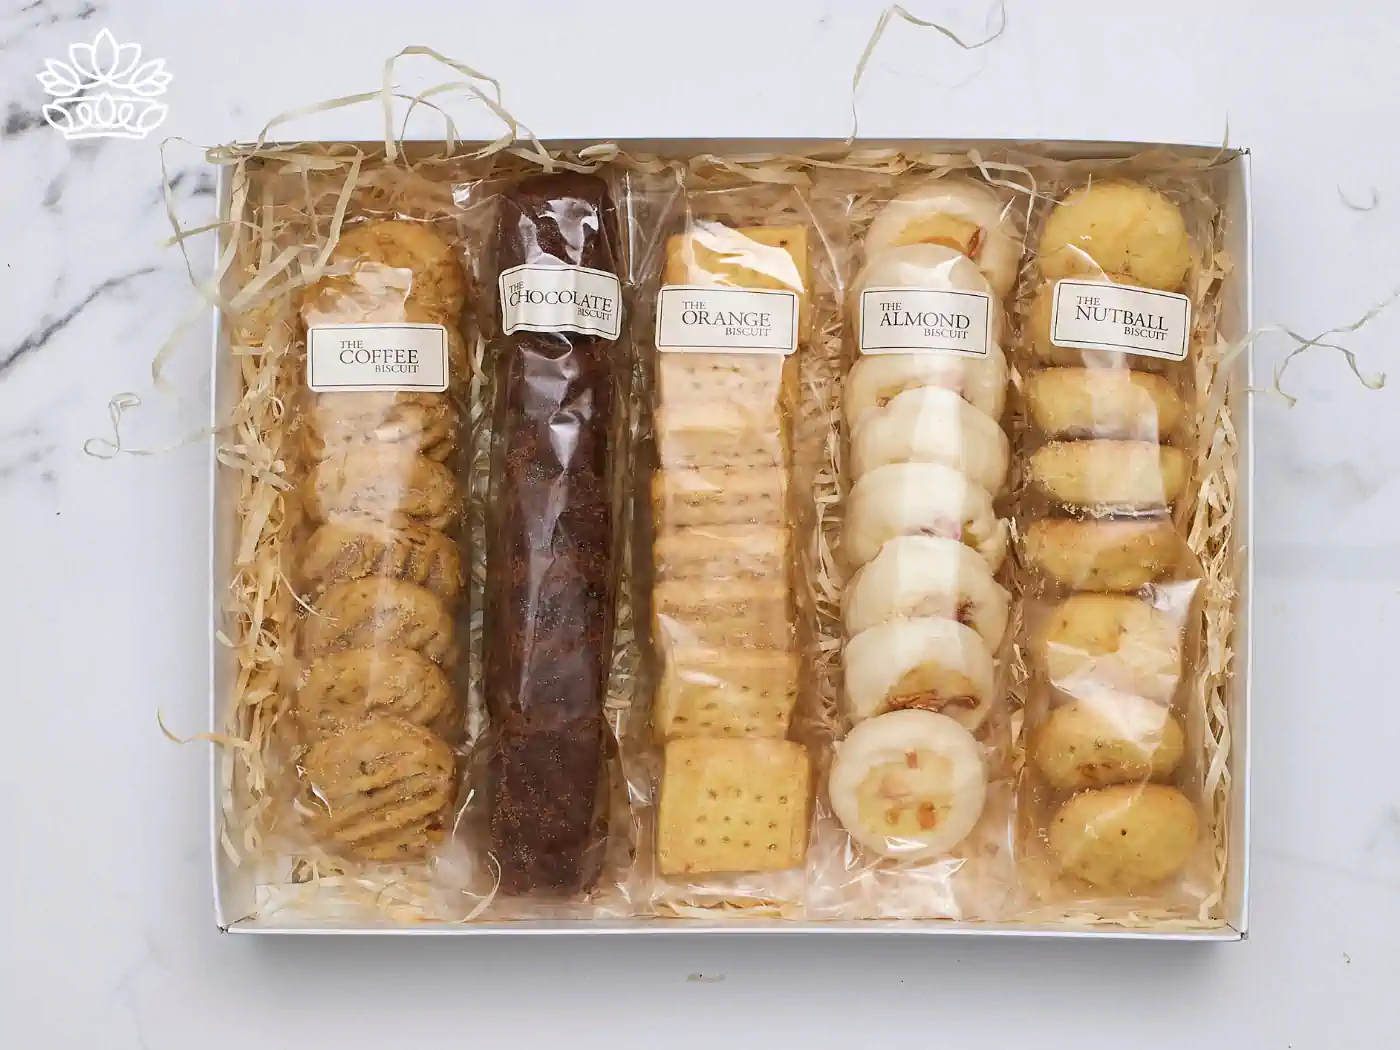 Assorted gourmet biscuit selection in a gift box, featuring flavors like coffee, chocolate, orange, almond, and nutball, elegantly presented on a marble background. Fabulous Flowers and Gifts.